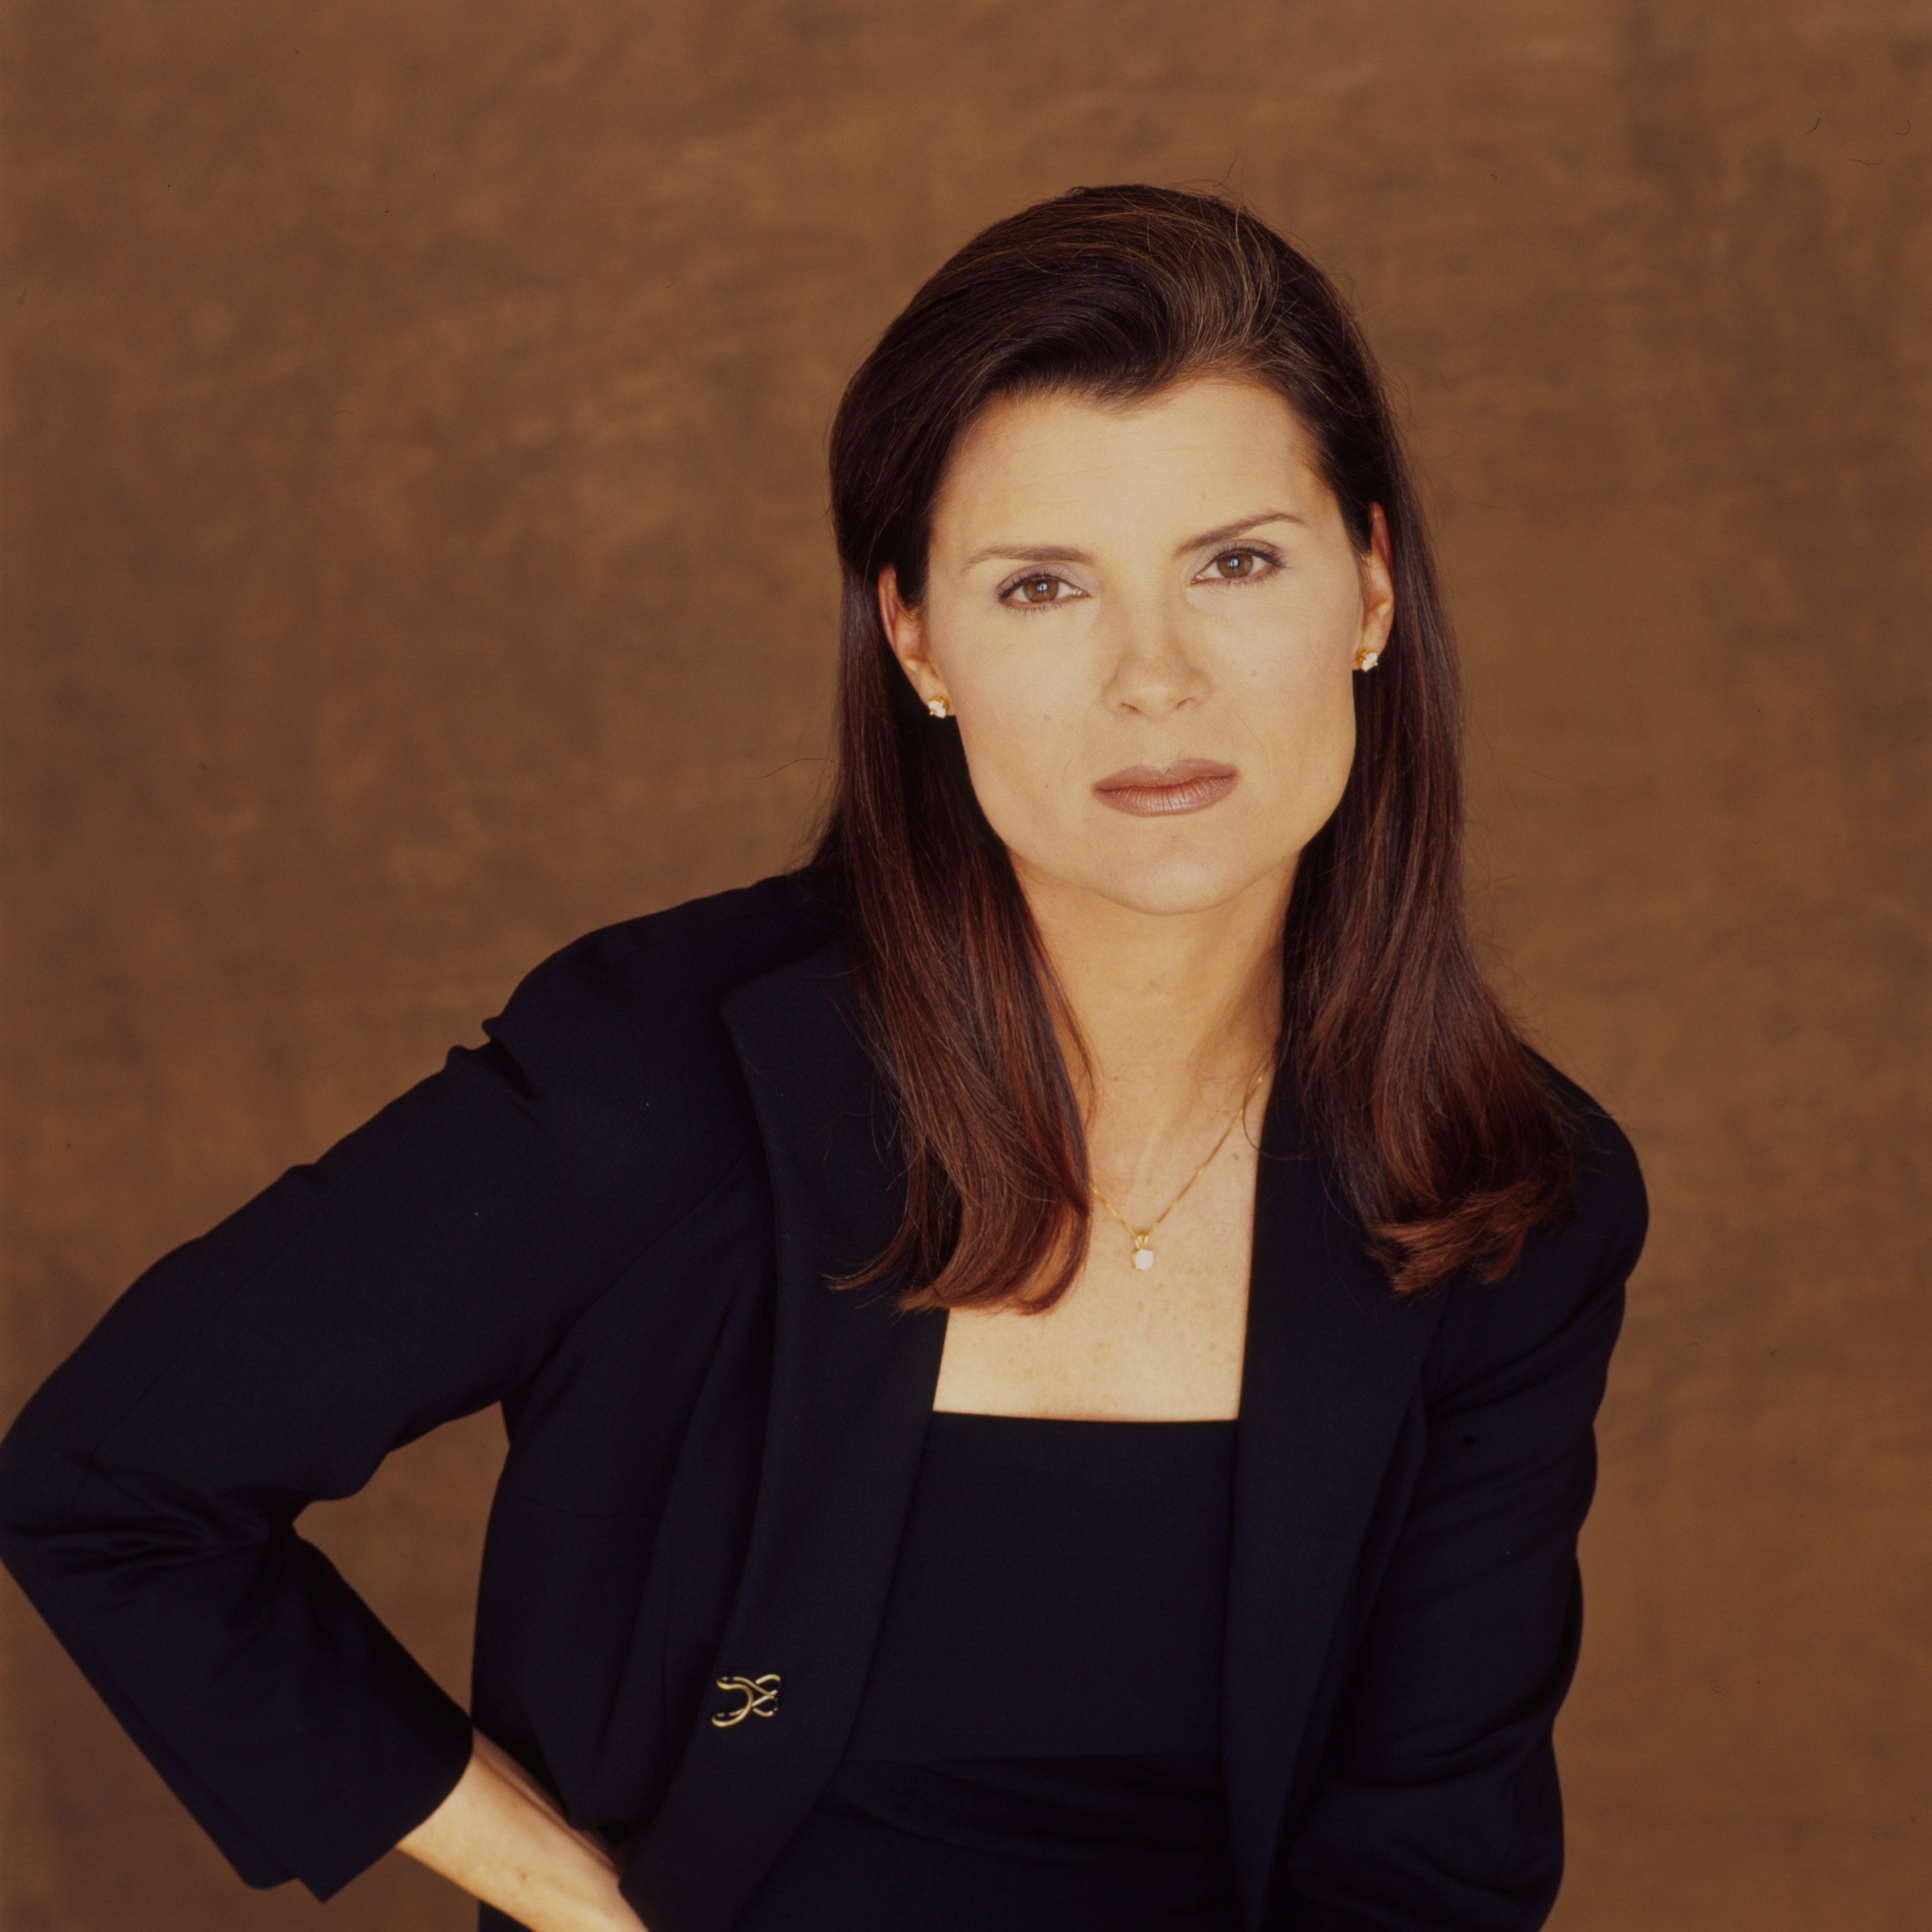 'The Bold and the Beautiful' actor Kimberlin Brown wearing a blue pantsuit and standing in front of a brown backdrop.